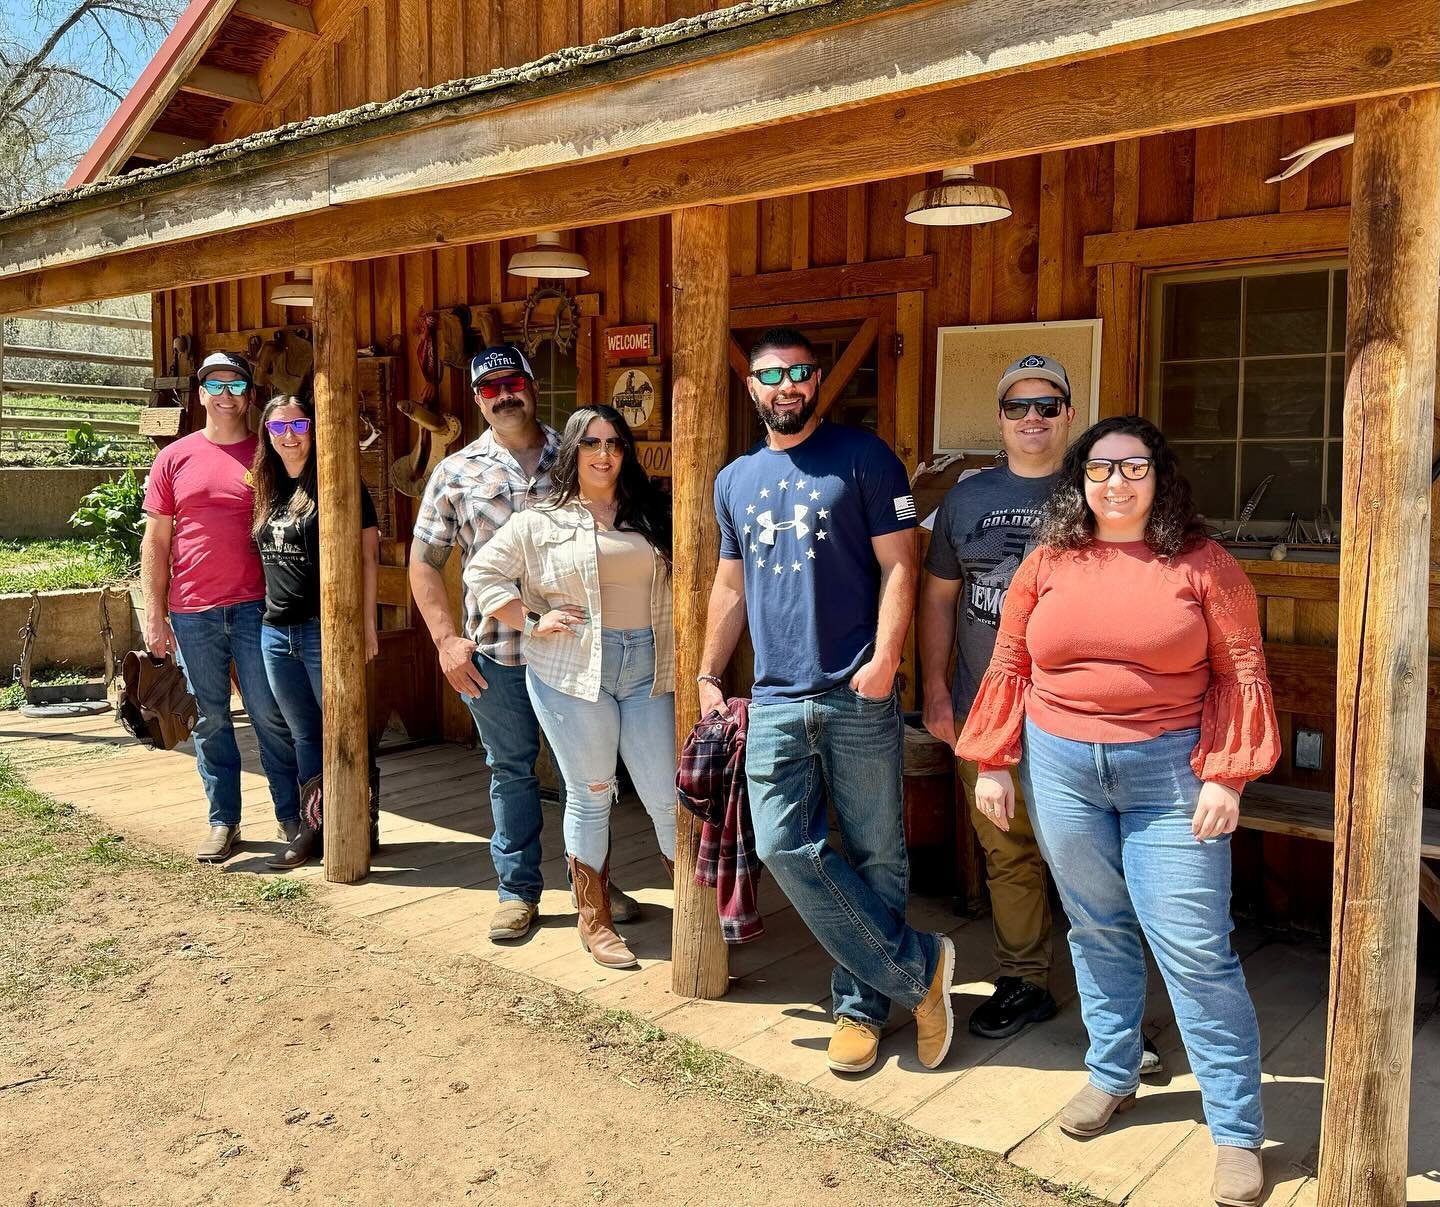 Despite having to make some last minute changes, the spring couples retreat was amazing. We enjoyed a beautiful horseback ride, delicious food, great sessions on connection and communication, some fun sports, bonfire, and Top Golf. Thank you to @sylv